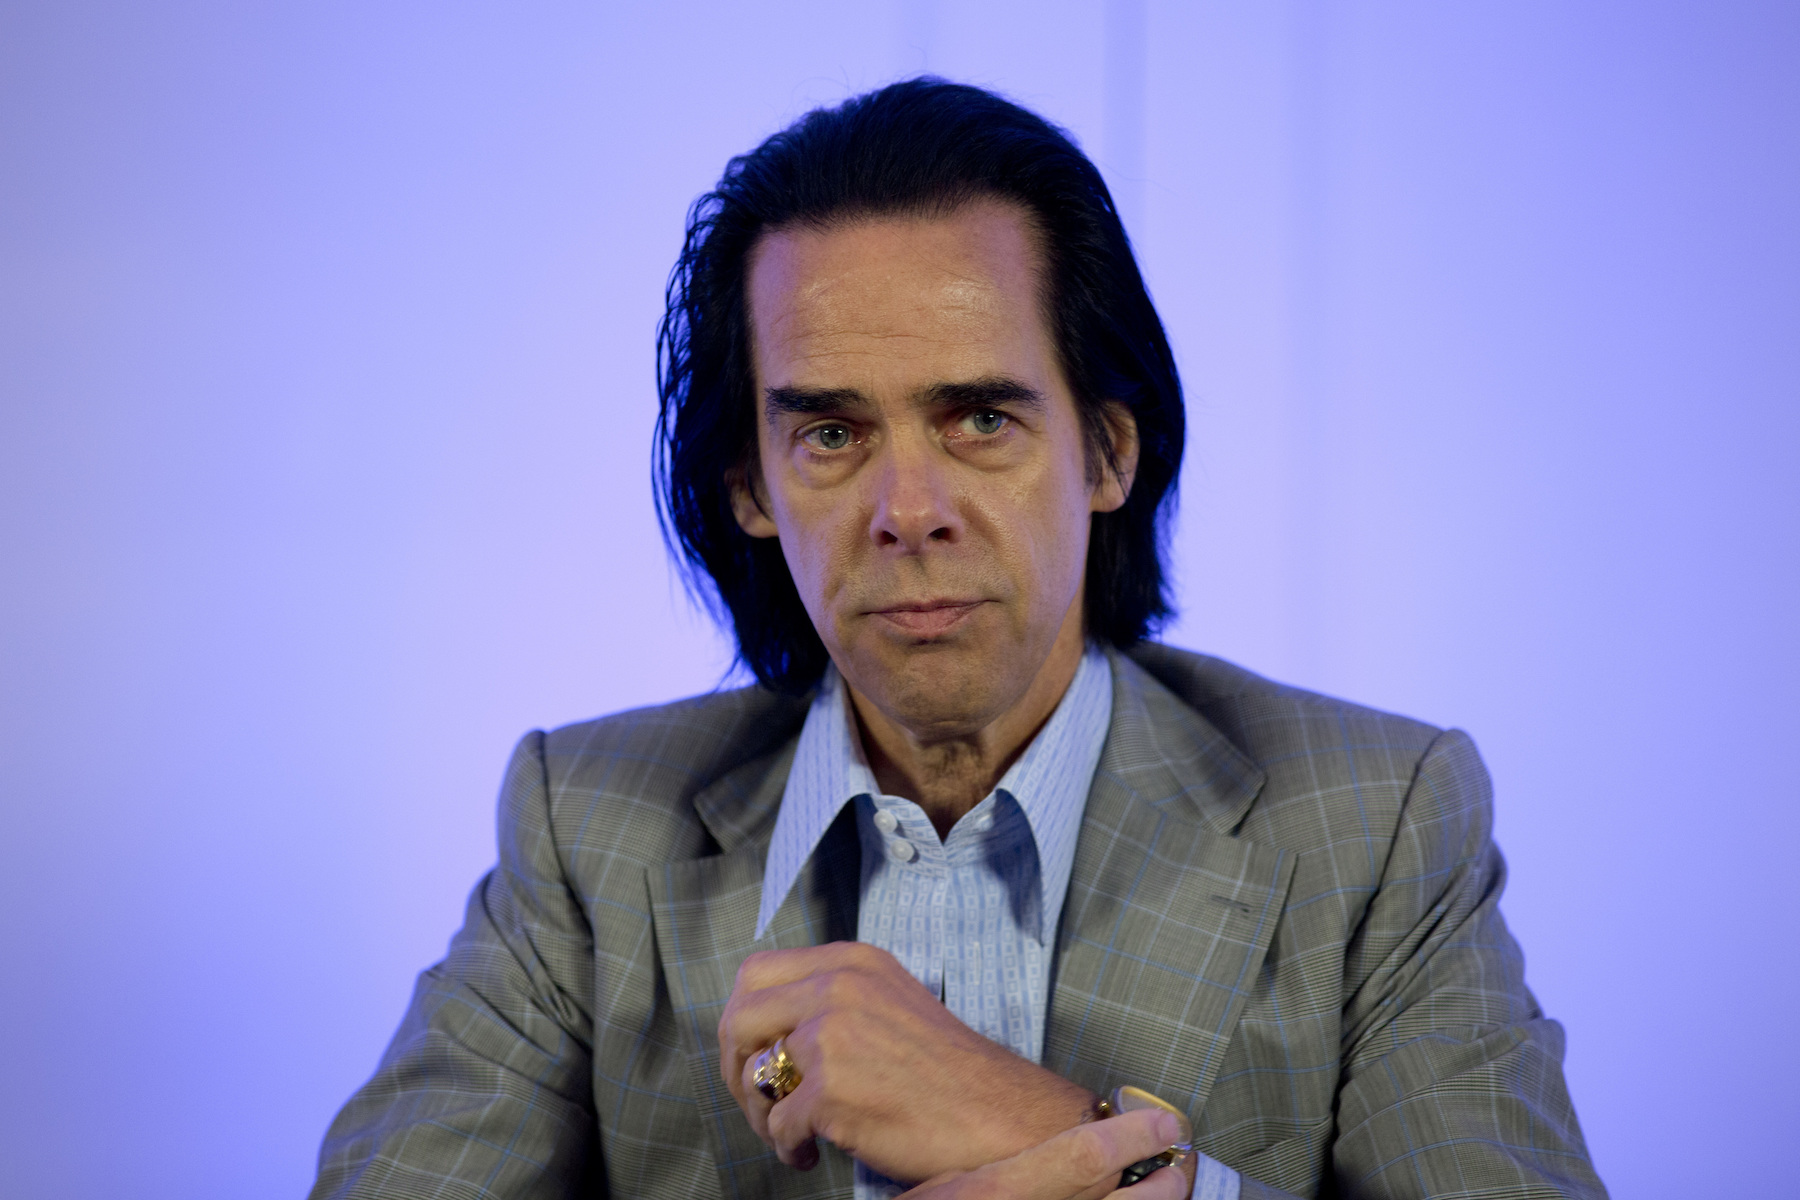 Nick Cave Thanks Fans for Support Following Son Jethro’s Death